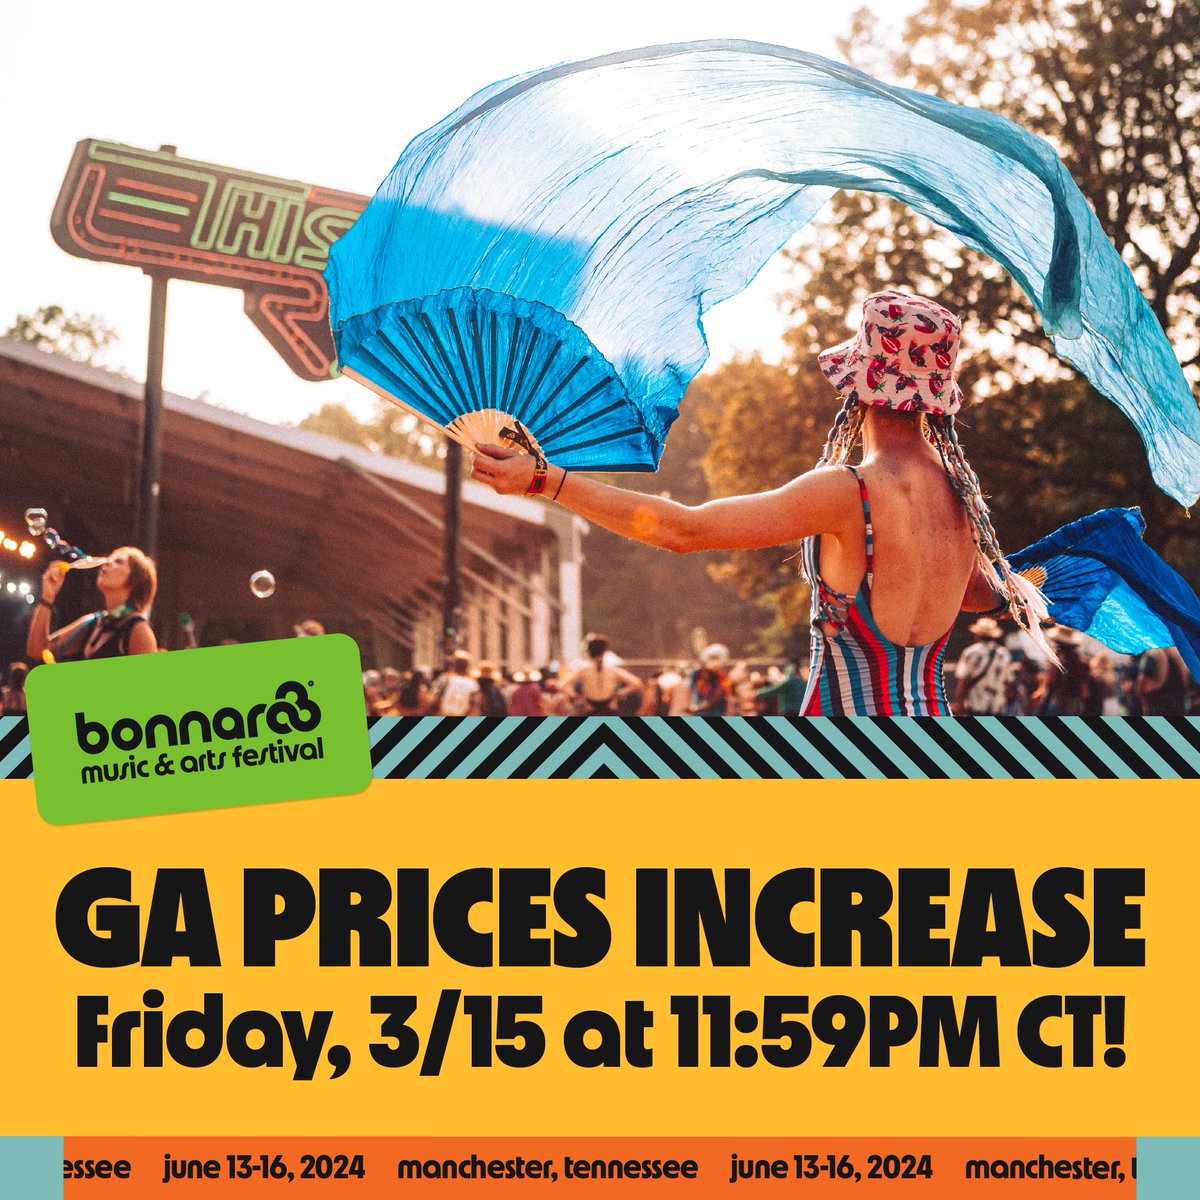 heads up ☝️ be sure to get your GA tickets before friday night to get the lowest possible price! bonnaroo.com